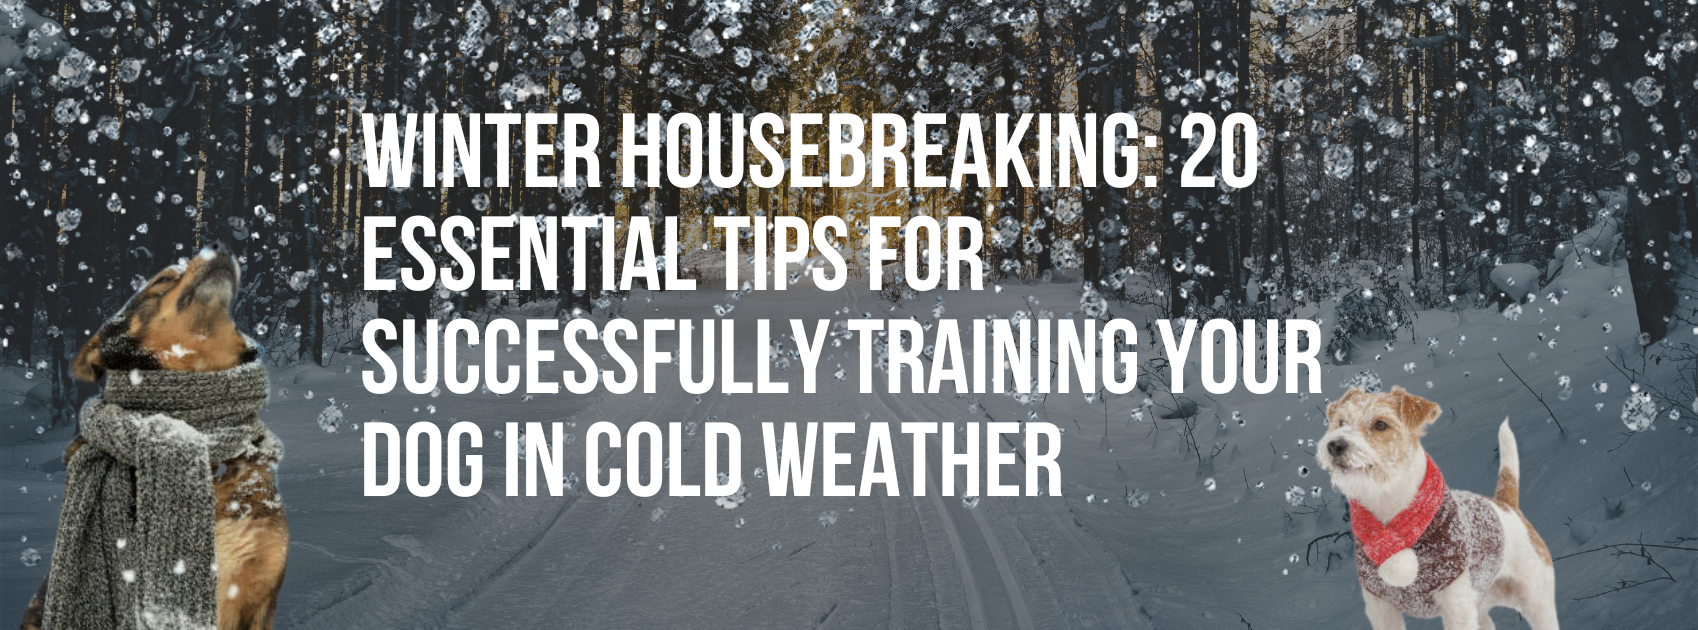 Winter Housebreaking: 20 Essential Tips for Successfully Training Your Dog in Cold Weather